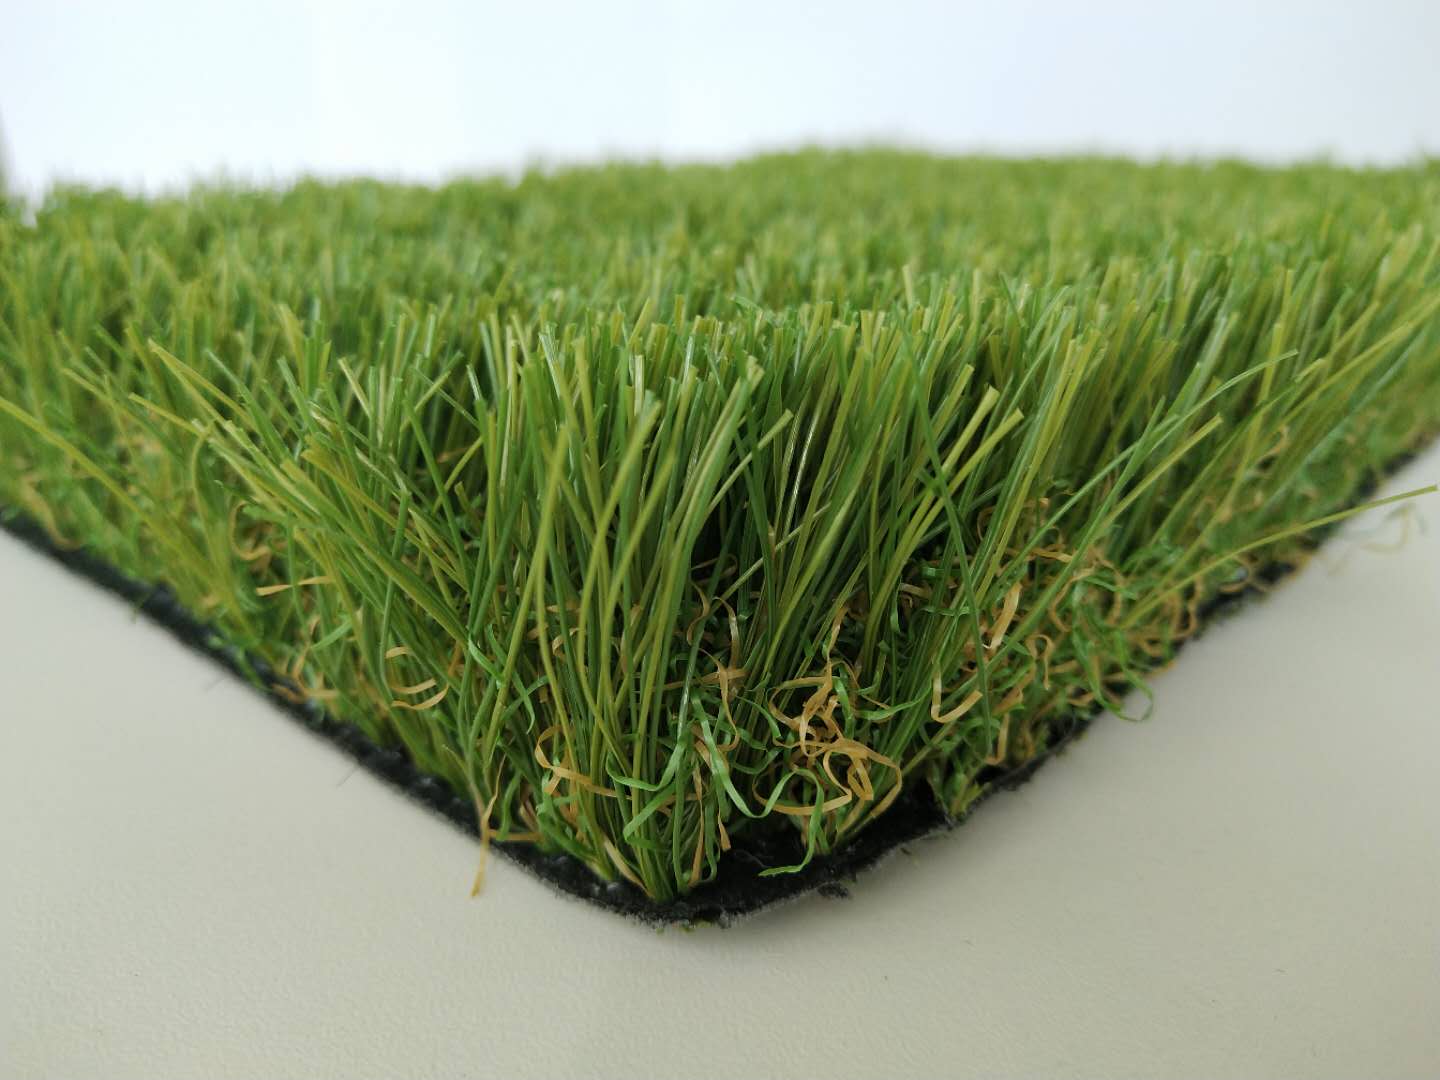 Nonwoven C shape residential turf for home gym